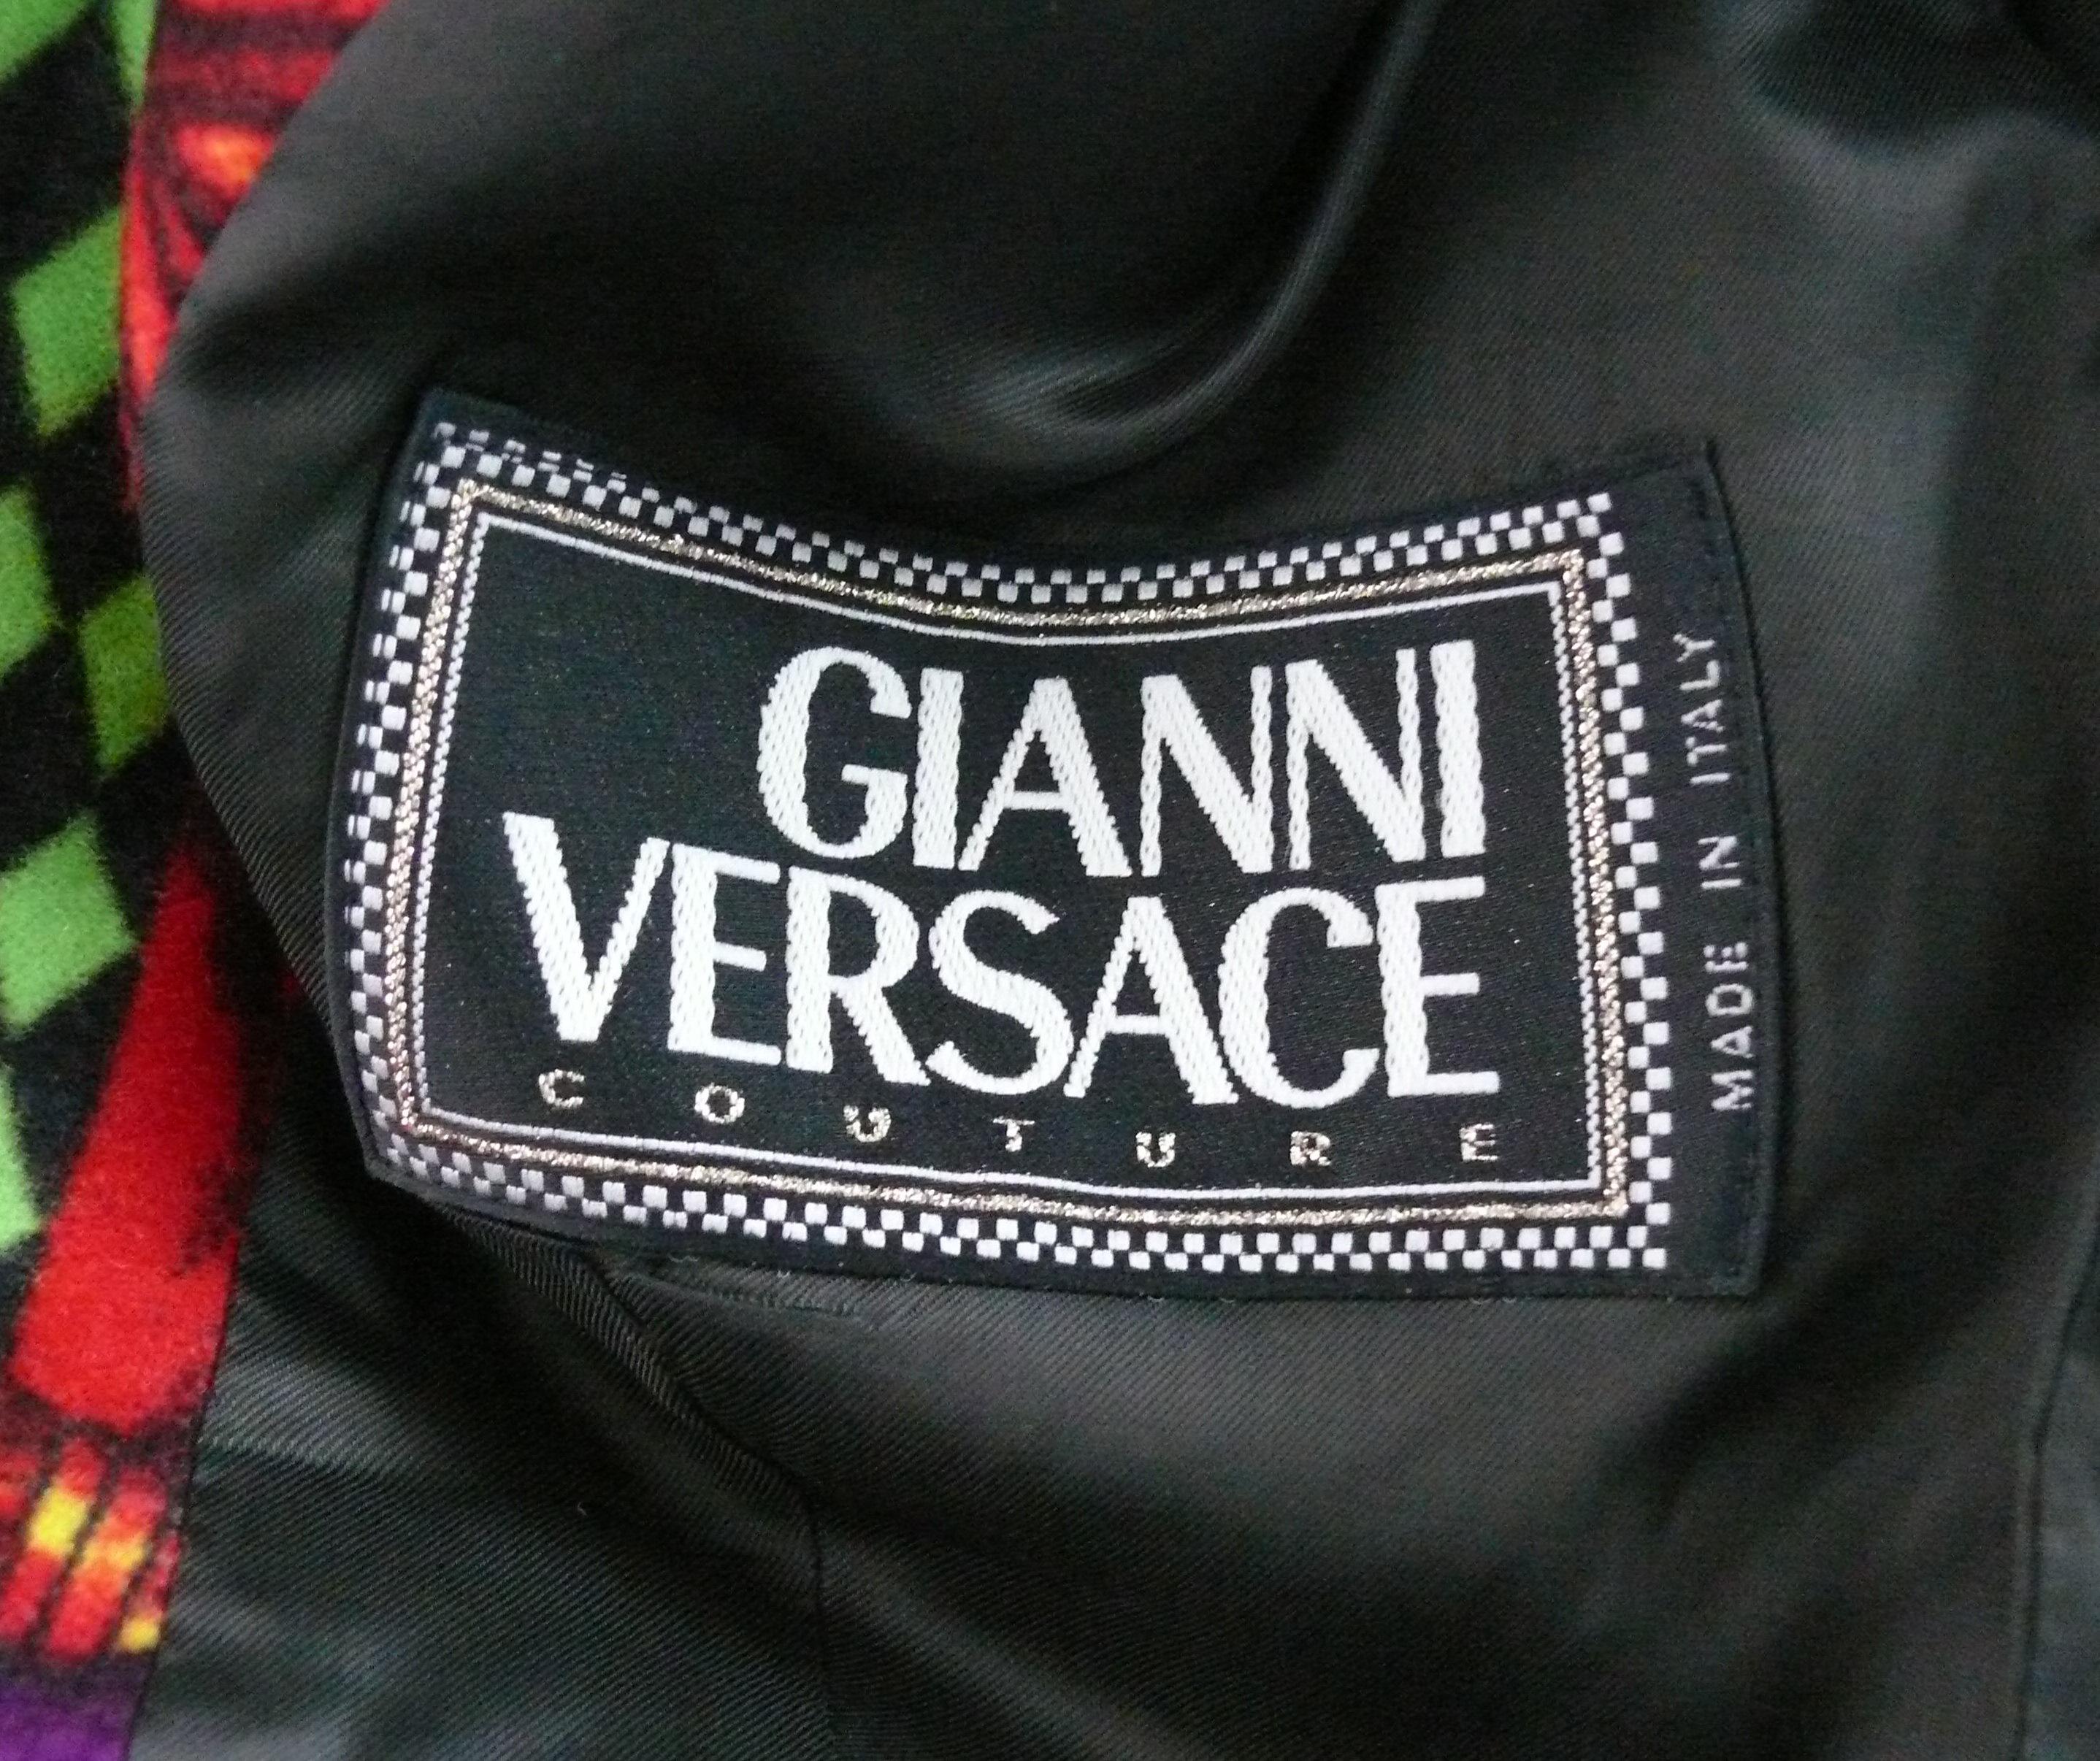 Gianni Versace Couture Iconic Fall/Winter 1991/92 Teather Drape Print Jacket For Sale 7